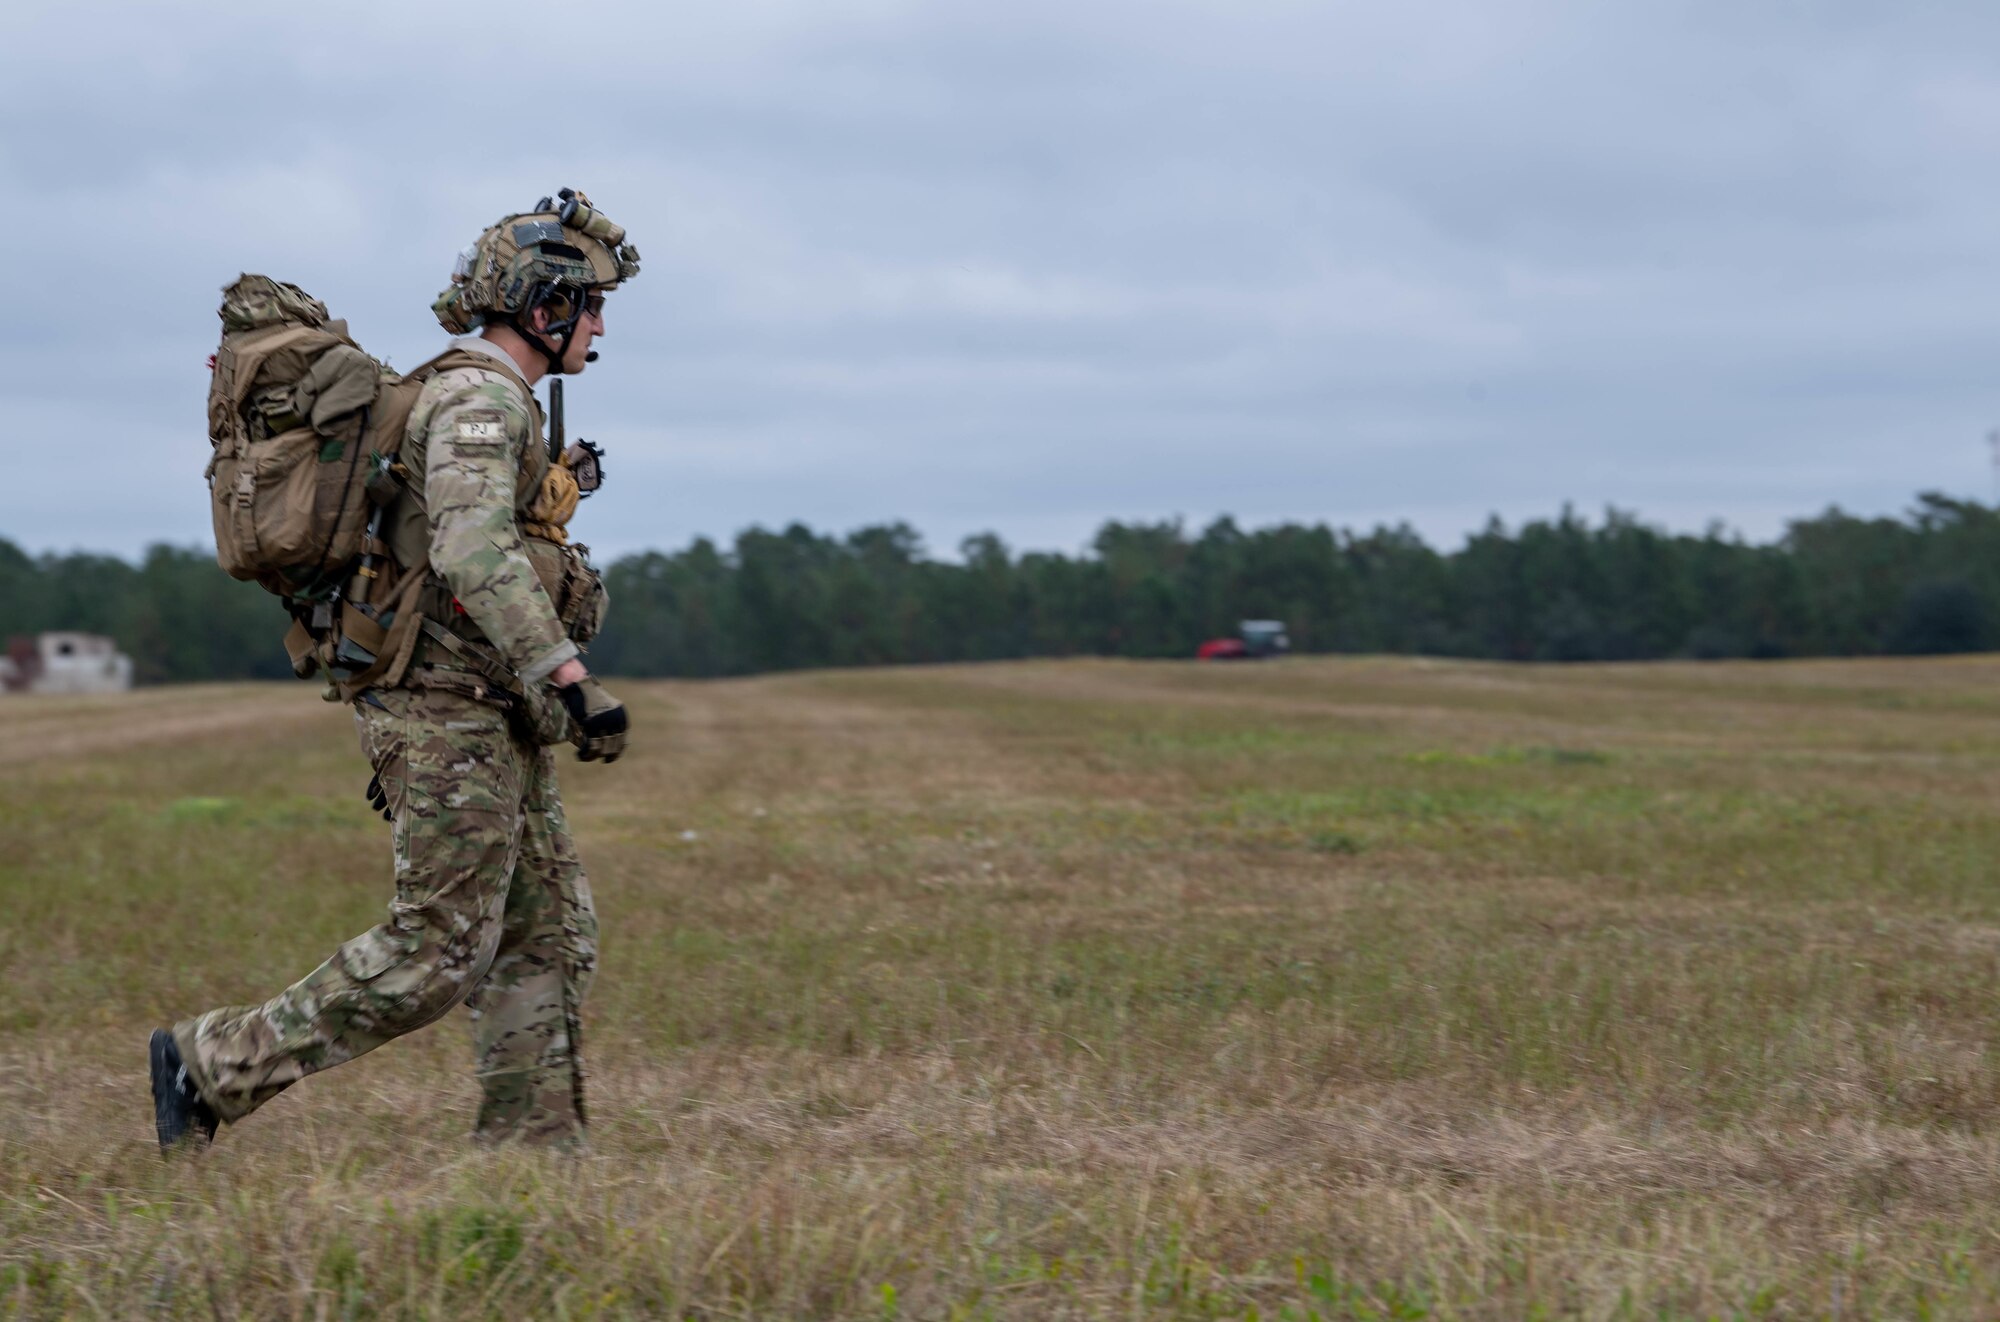 A Special Tactics operator walks close to us from from left to right across a field with a heavy pack. We see a large field of grass stretching off into the distance where it meets a tree line.